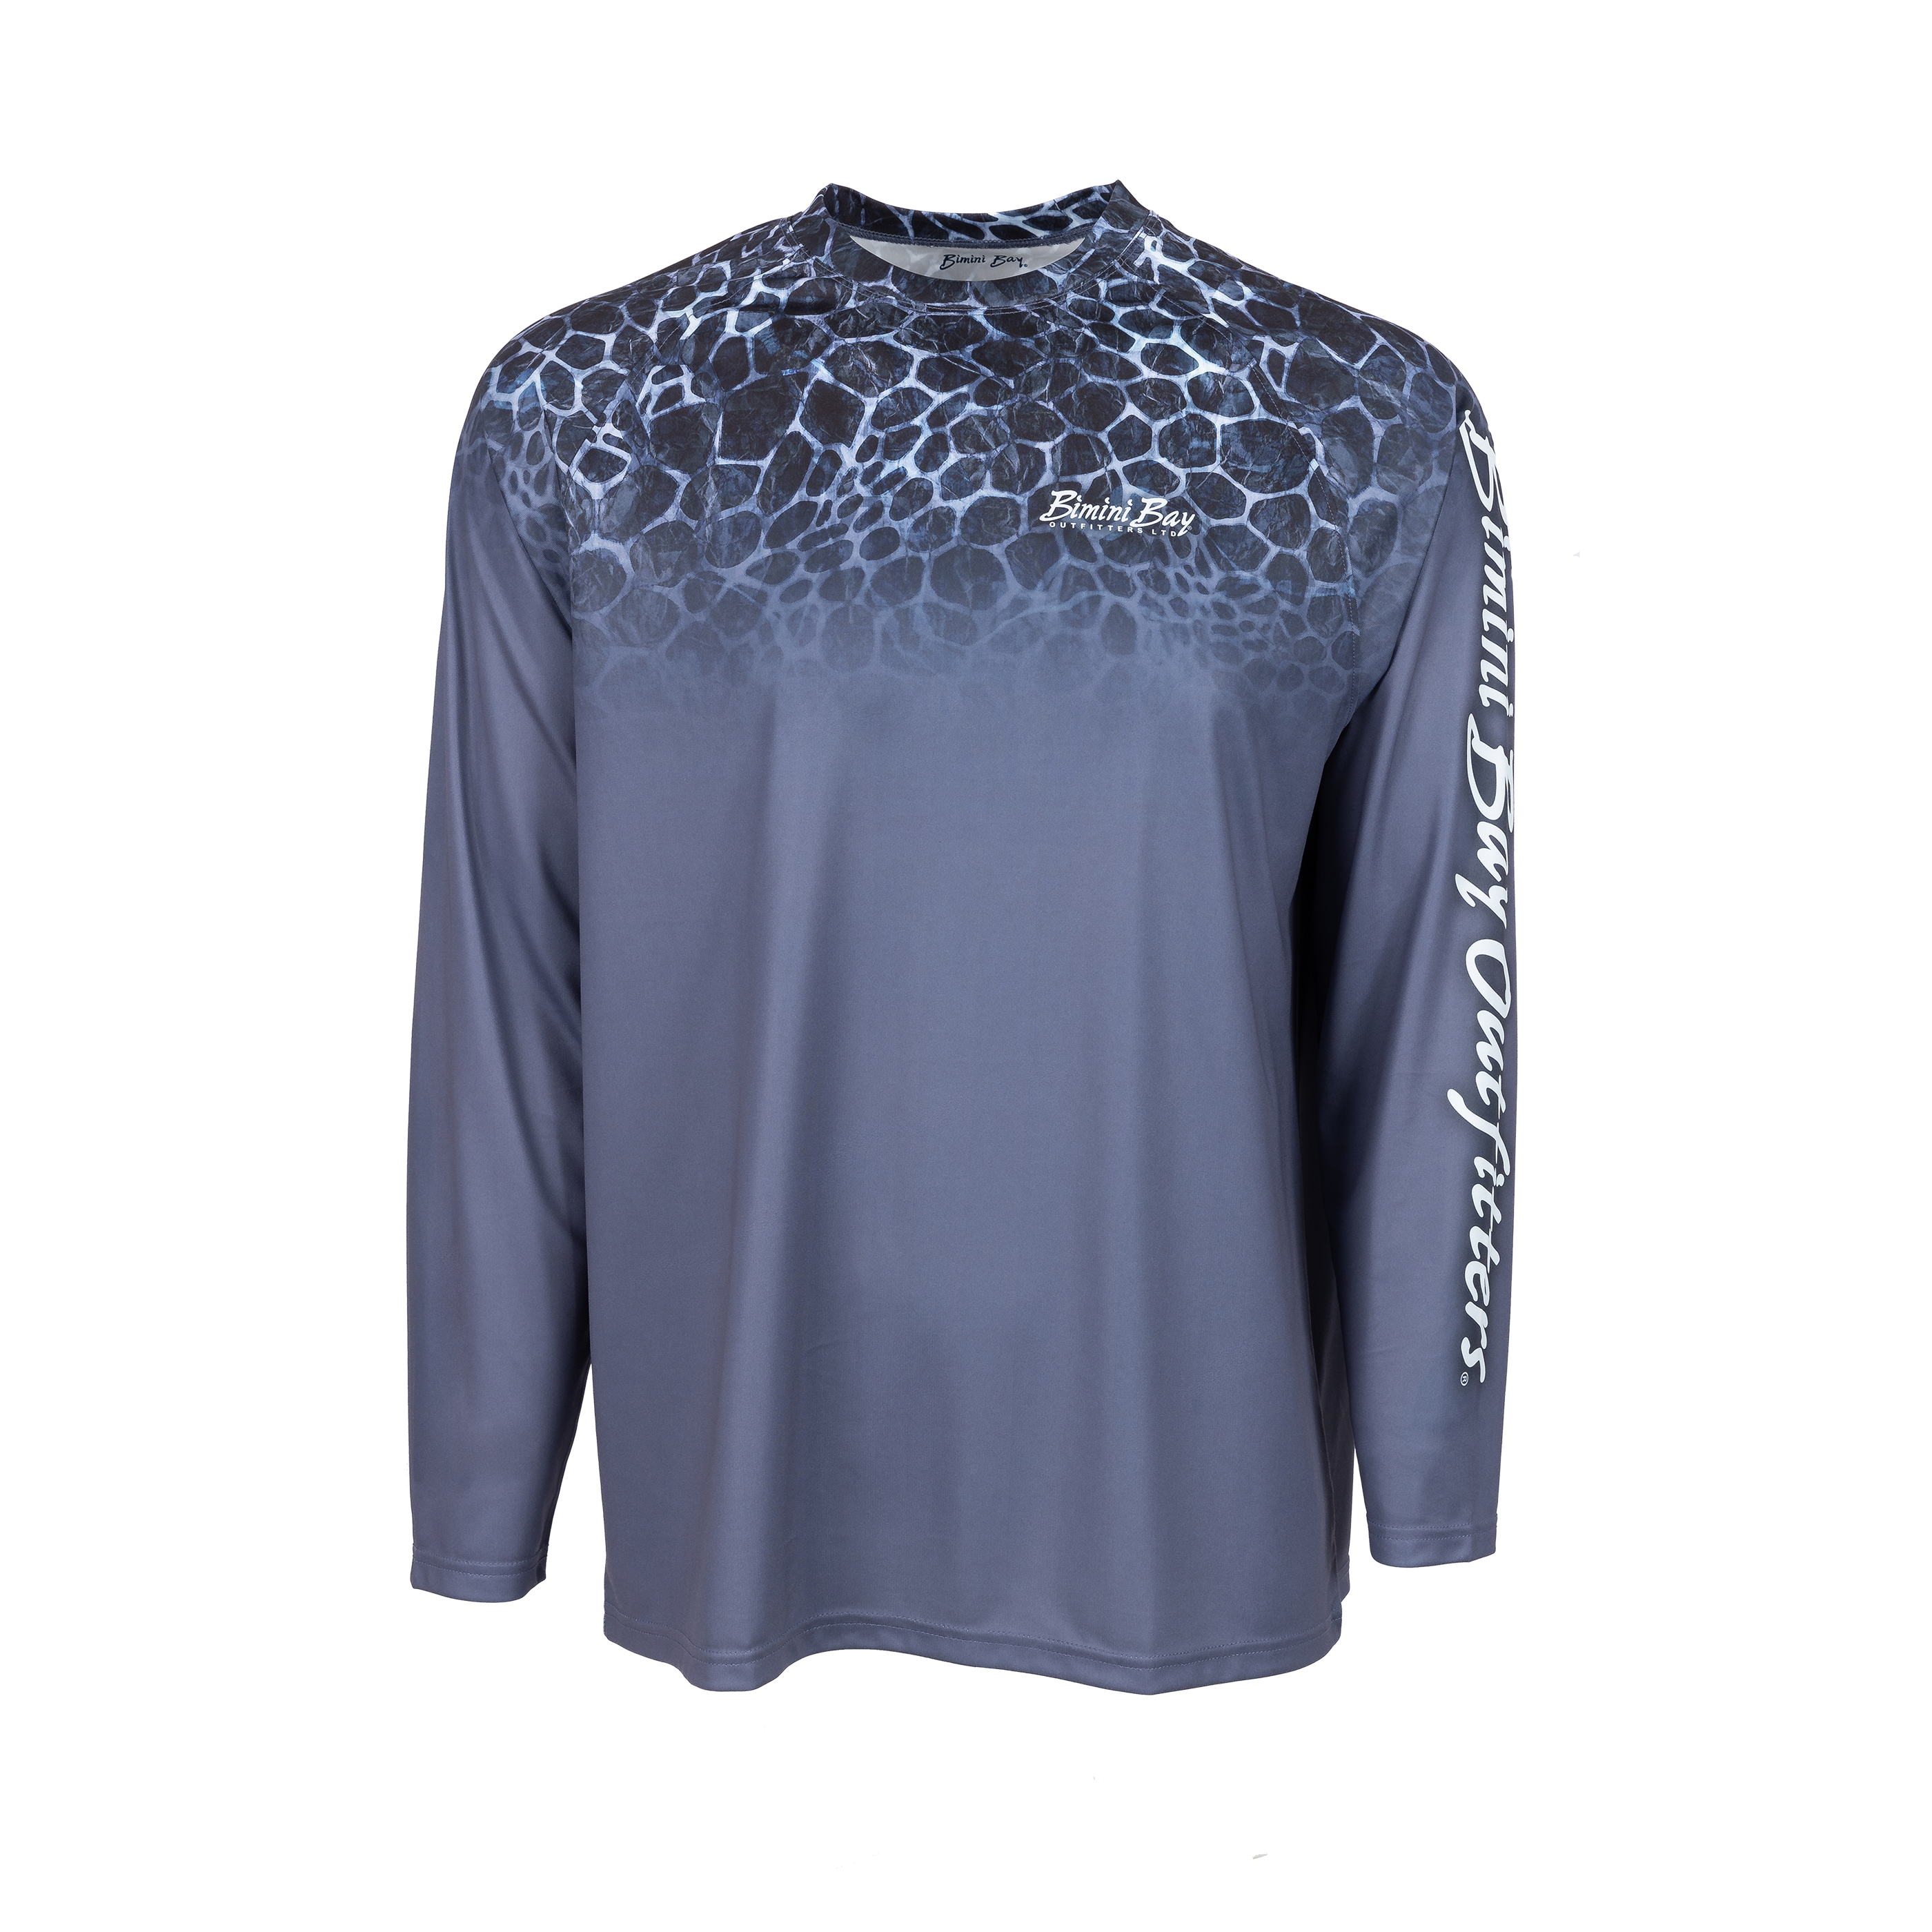 Bimini Bay Outfitters Octocoral Men's Performance Long Sleeve Tee